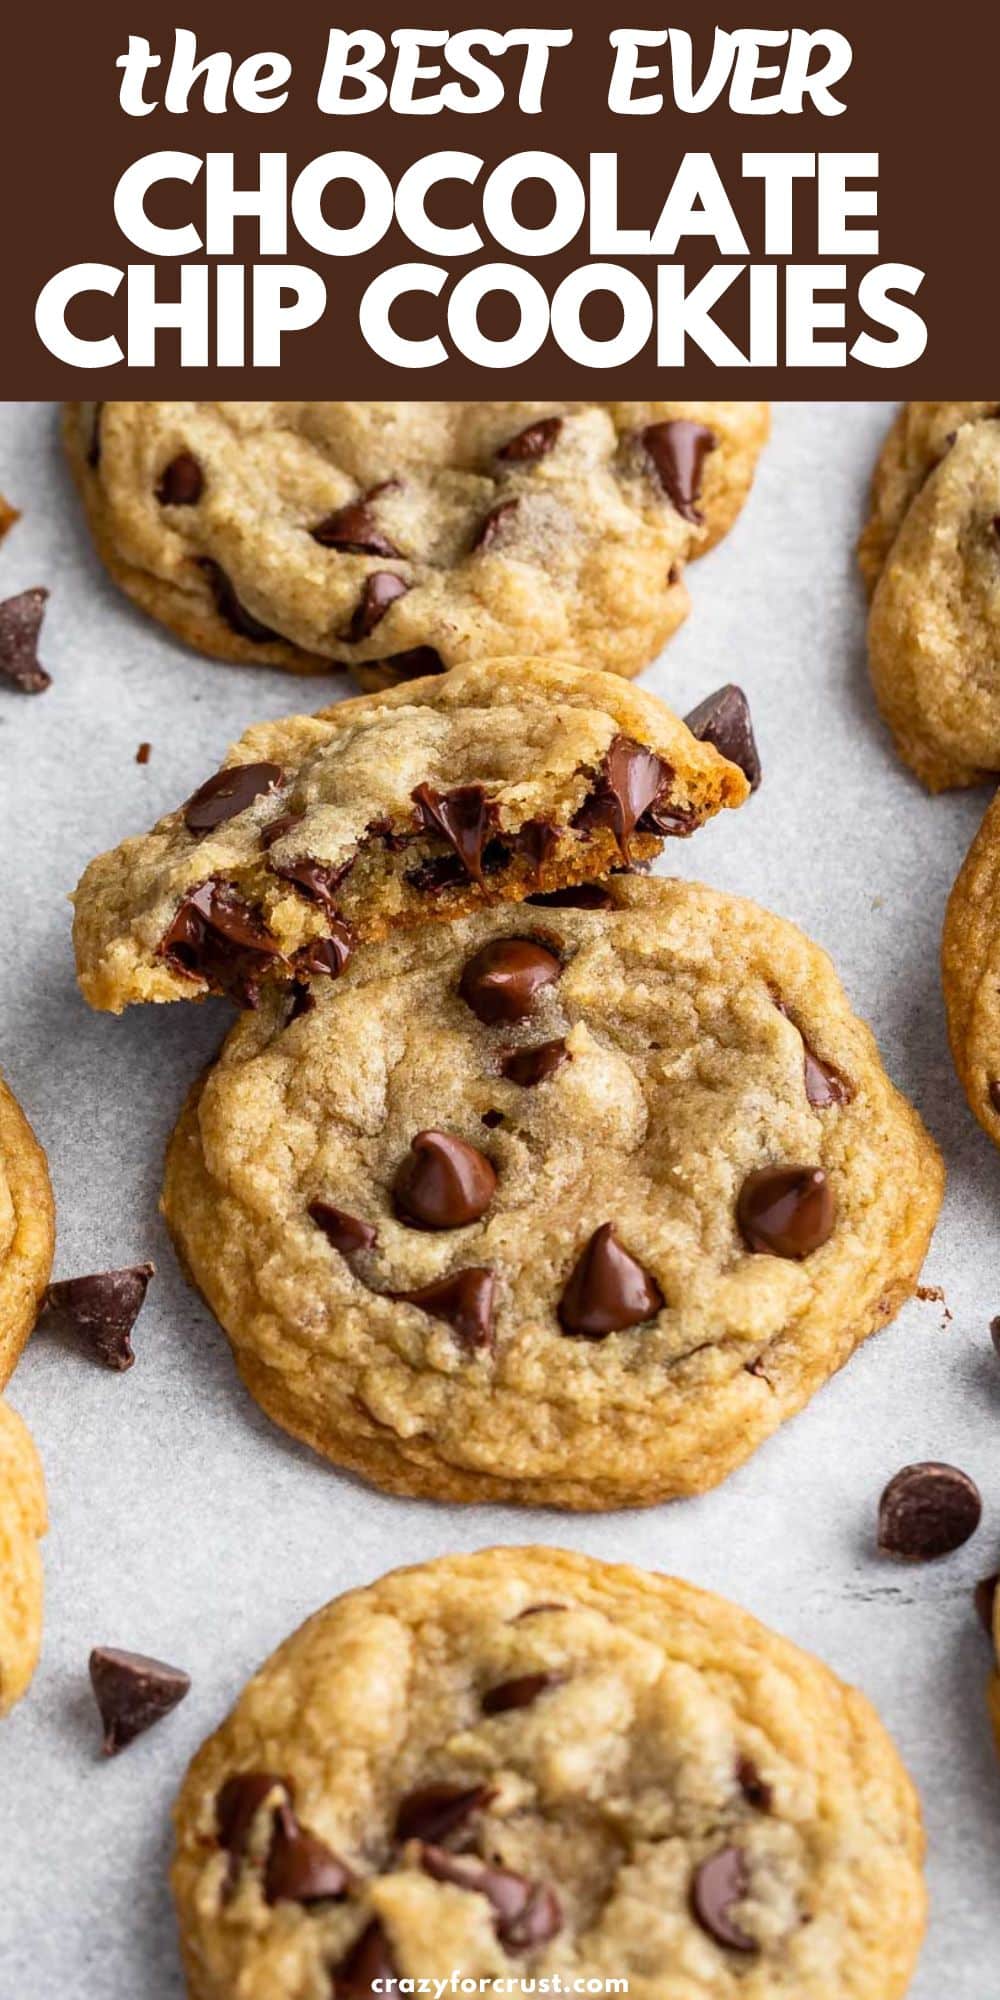 chocolate chip cookies on gray background with one cut in half